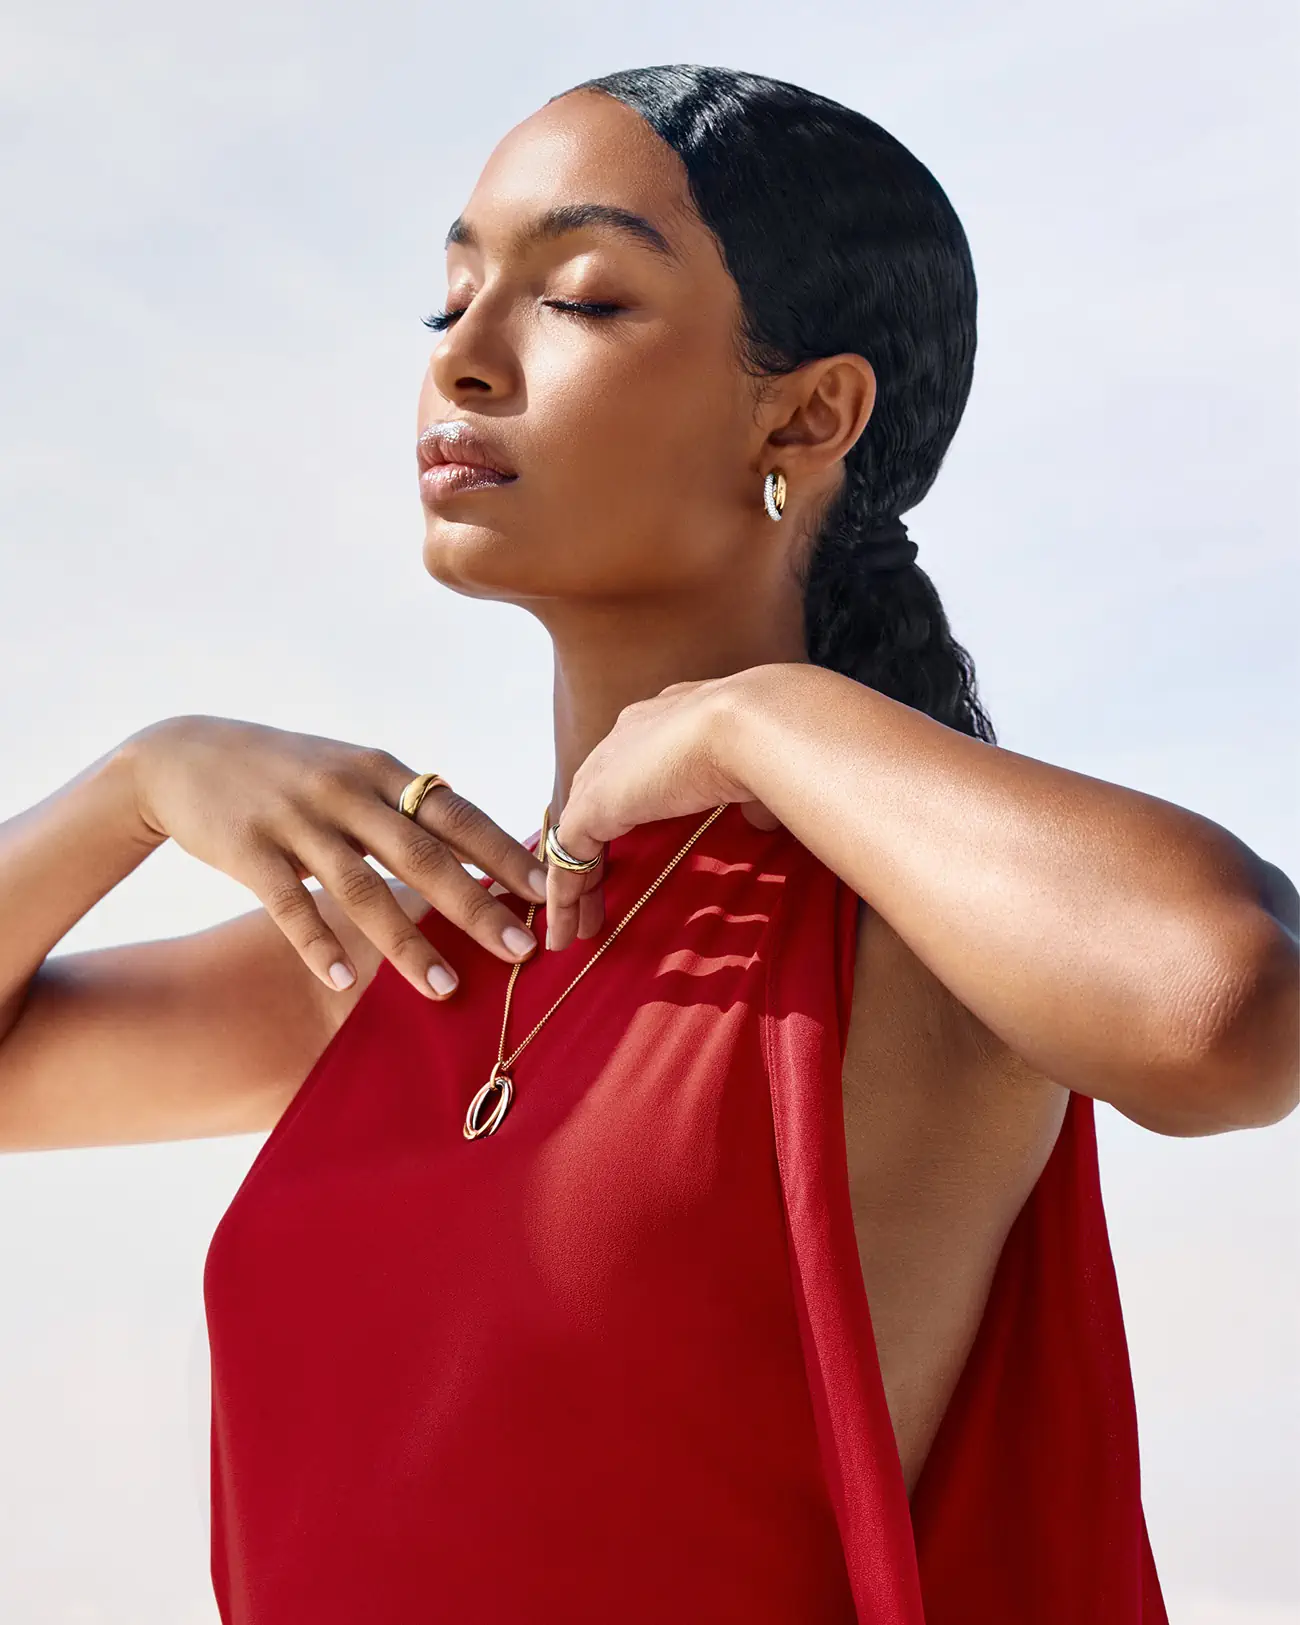 Cartier Trinity centenary campaign unveiled with a star-studded cast